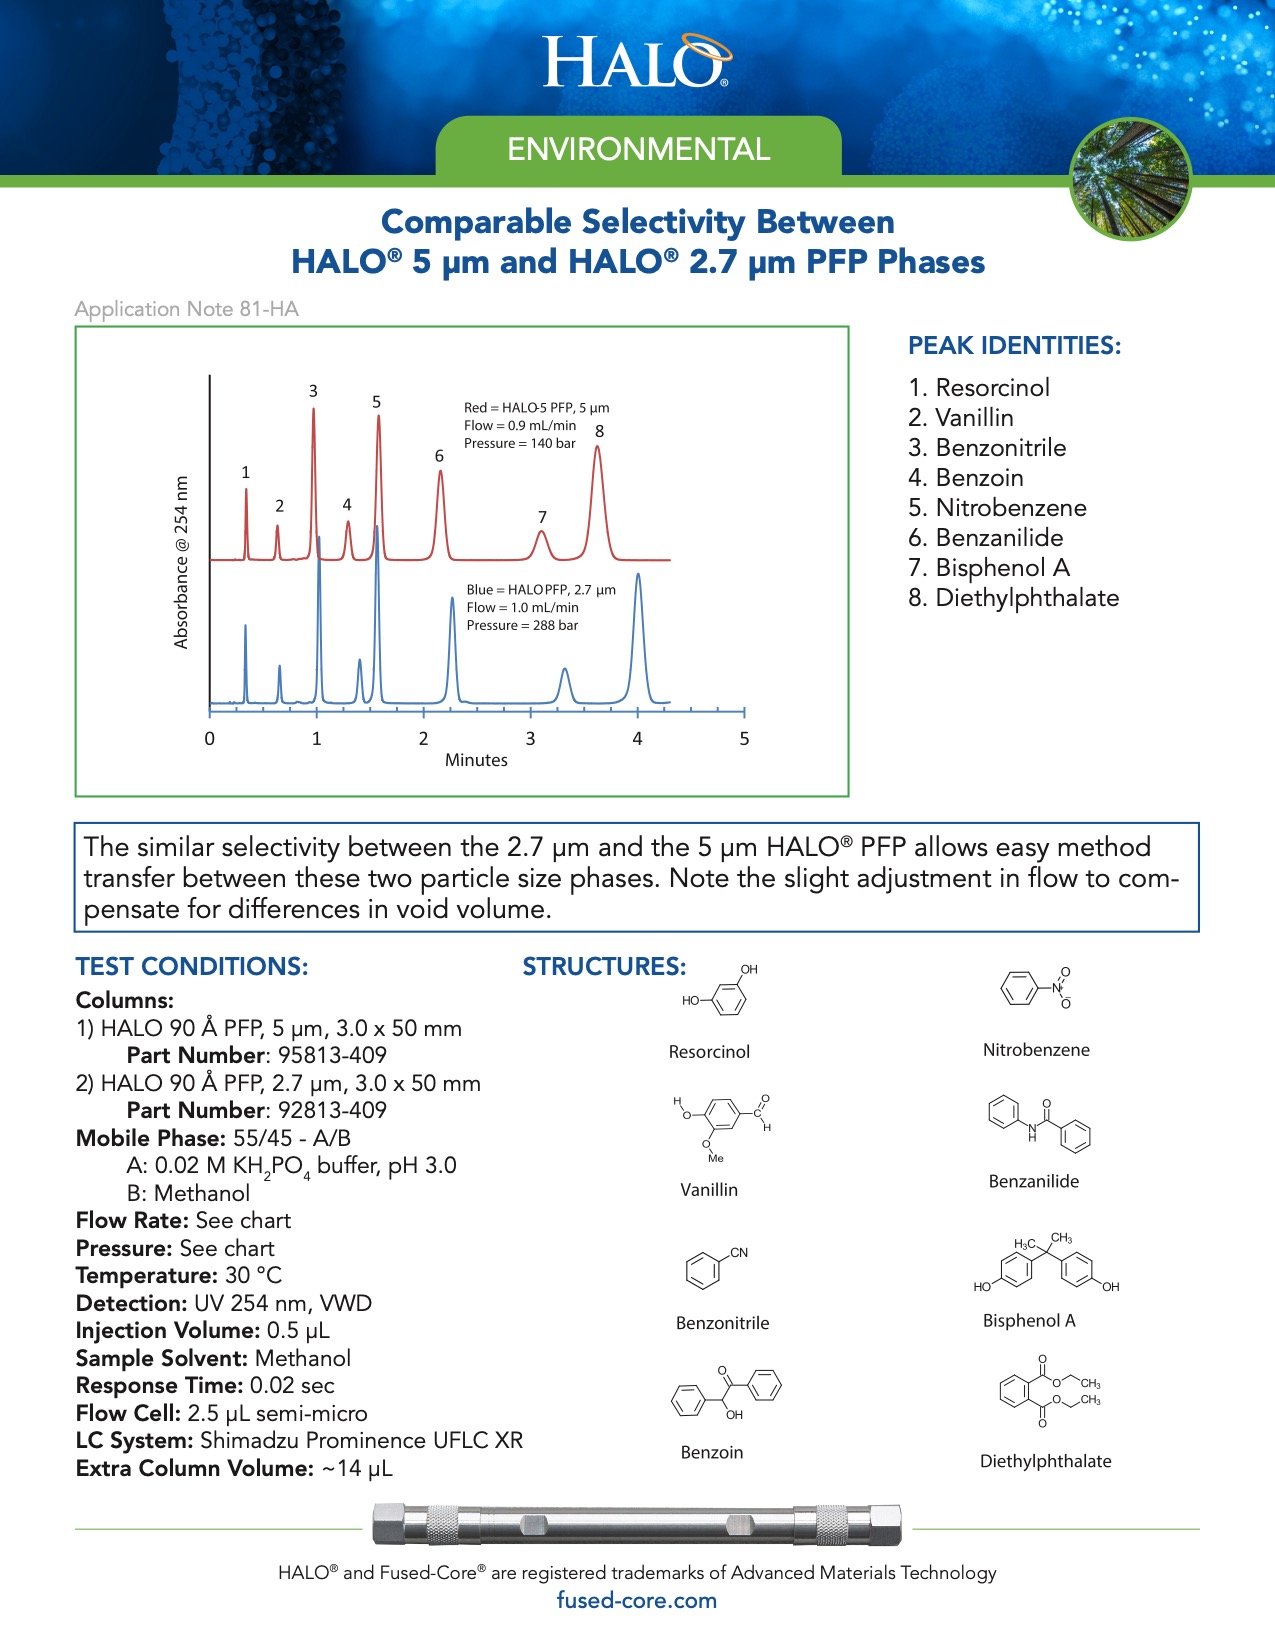 comparable selectivity between halo 5 micron and halo 2.7 micron pfp phases